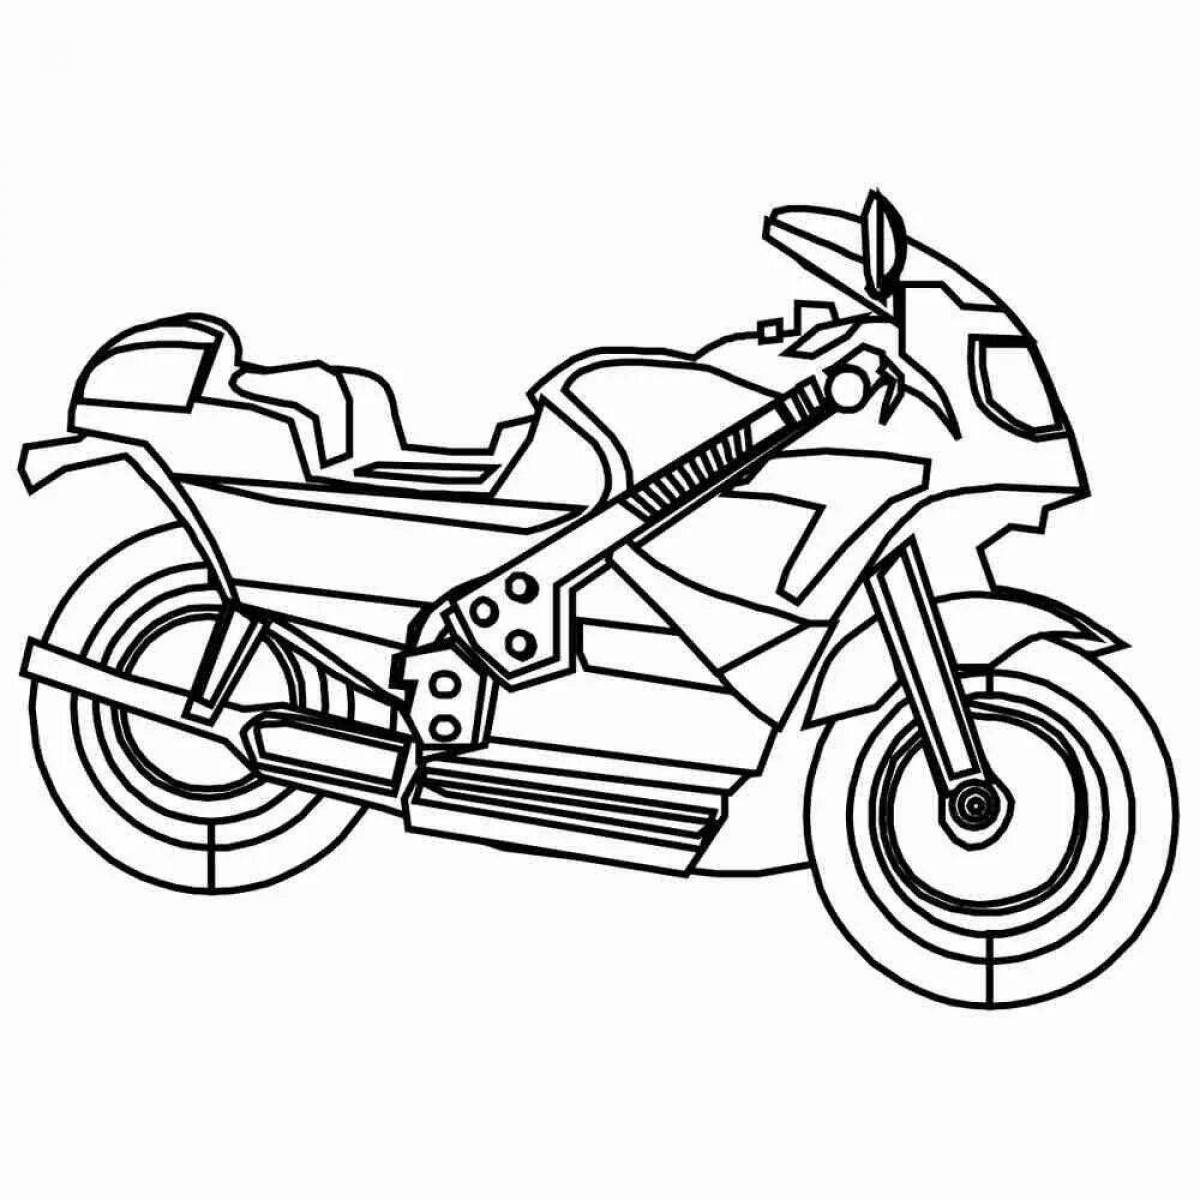 Colouring awesome cars and bikes